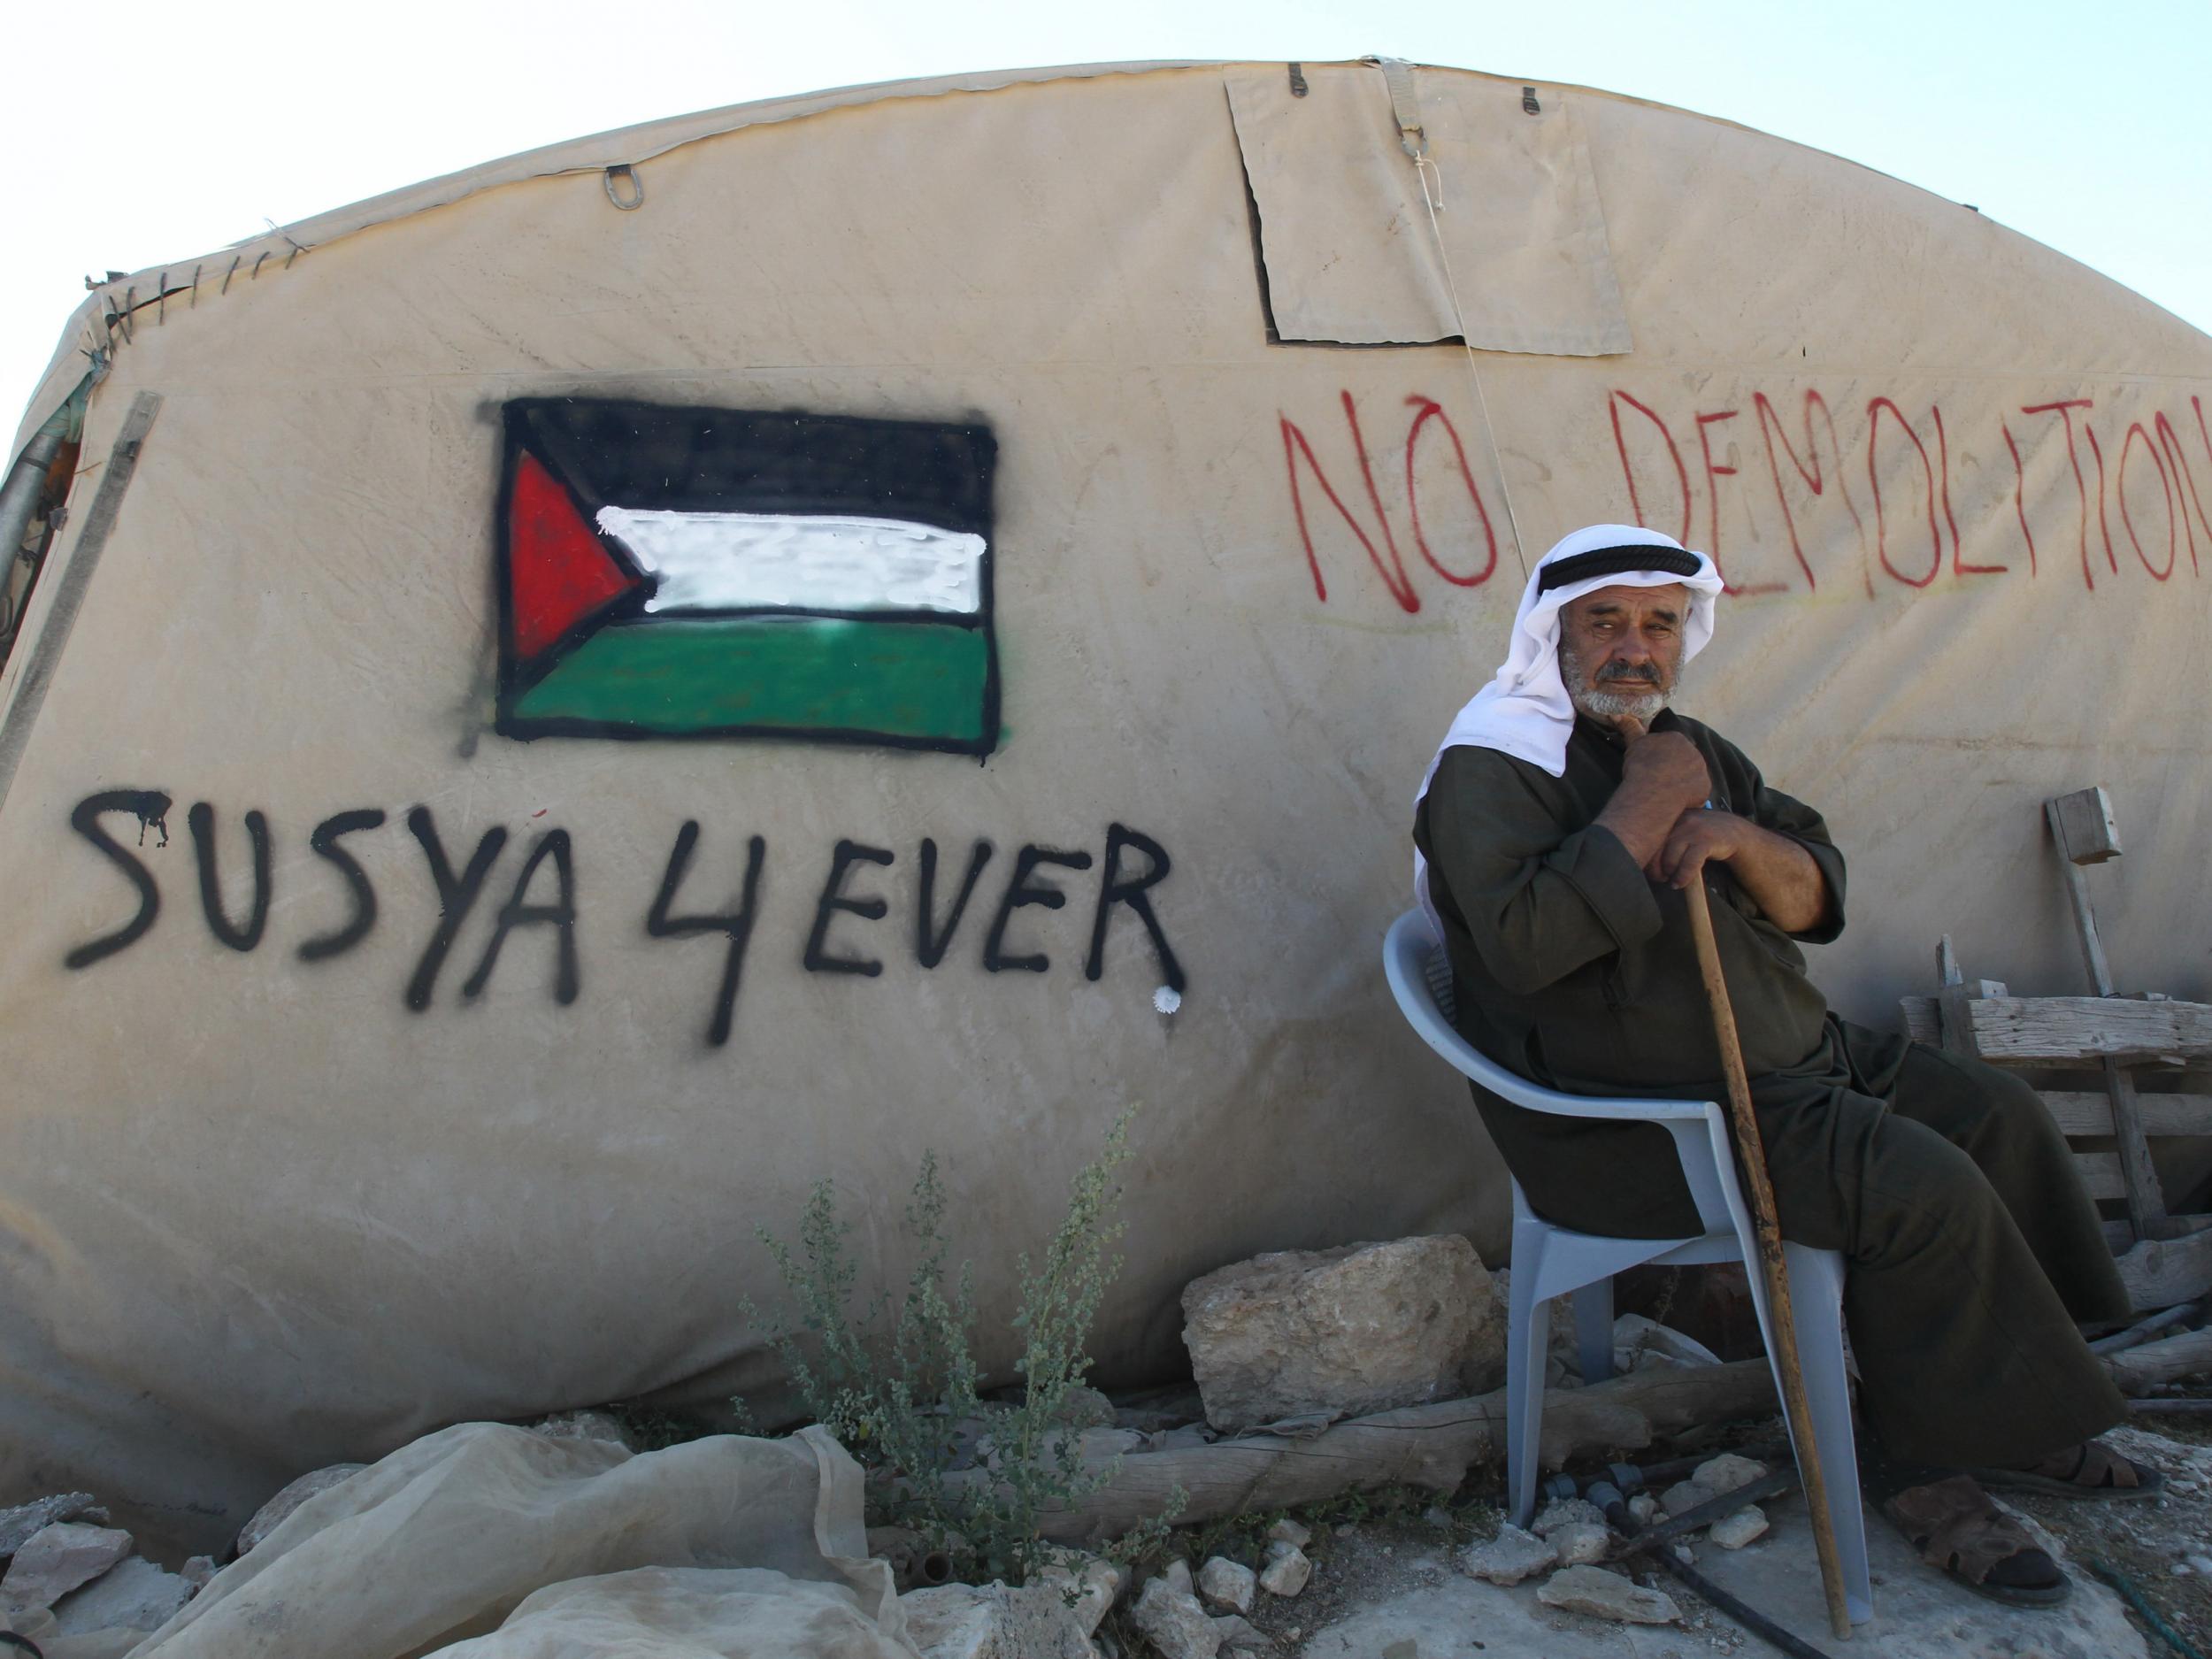 Palestinian residents of Susiya have resorted to living in tents after bricks-and-mortar constructions were torn down